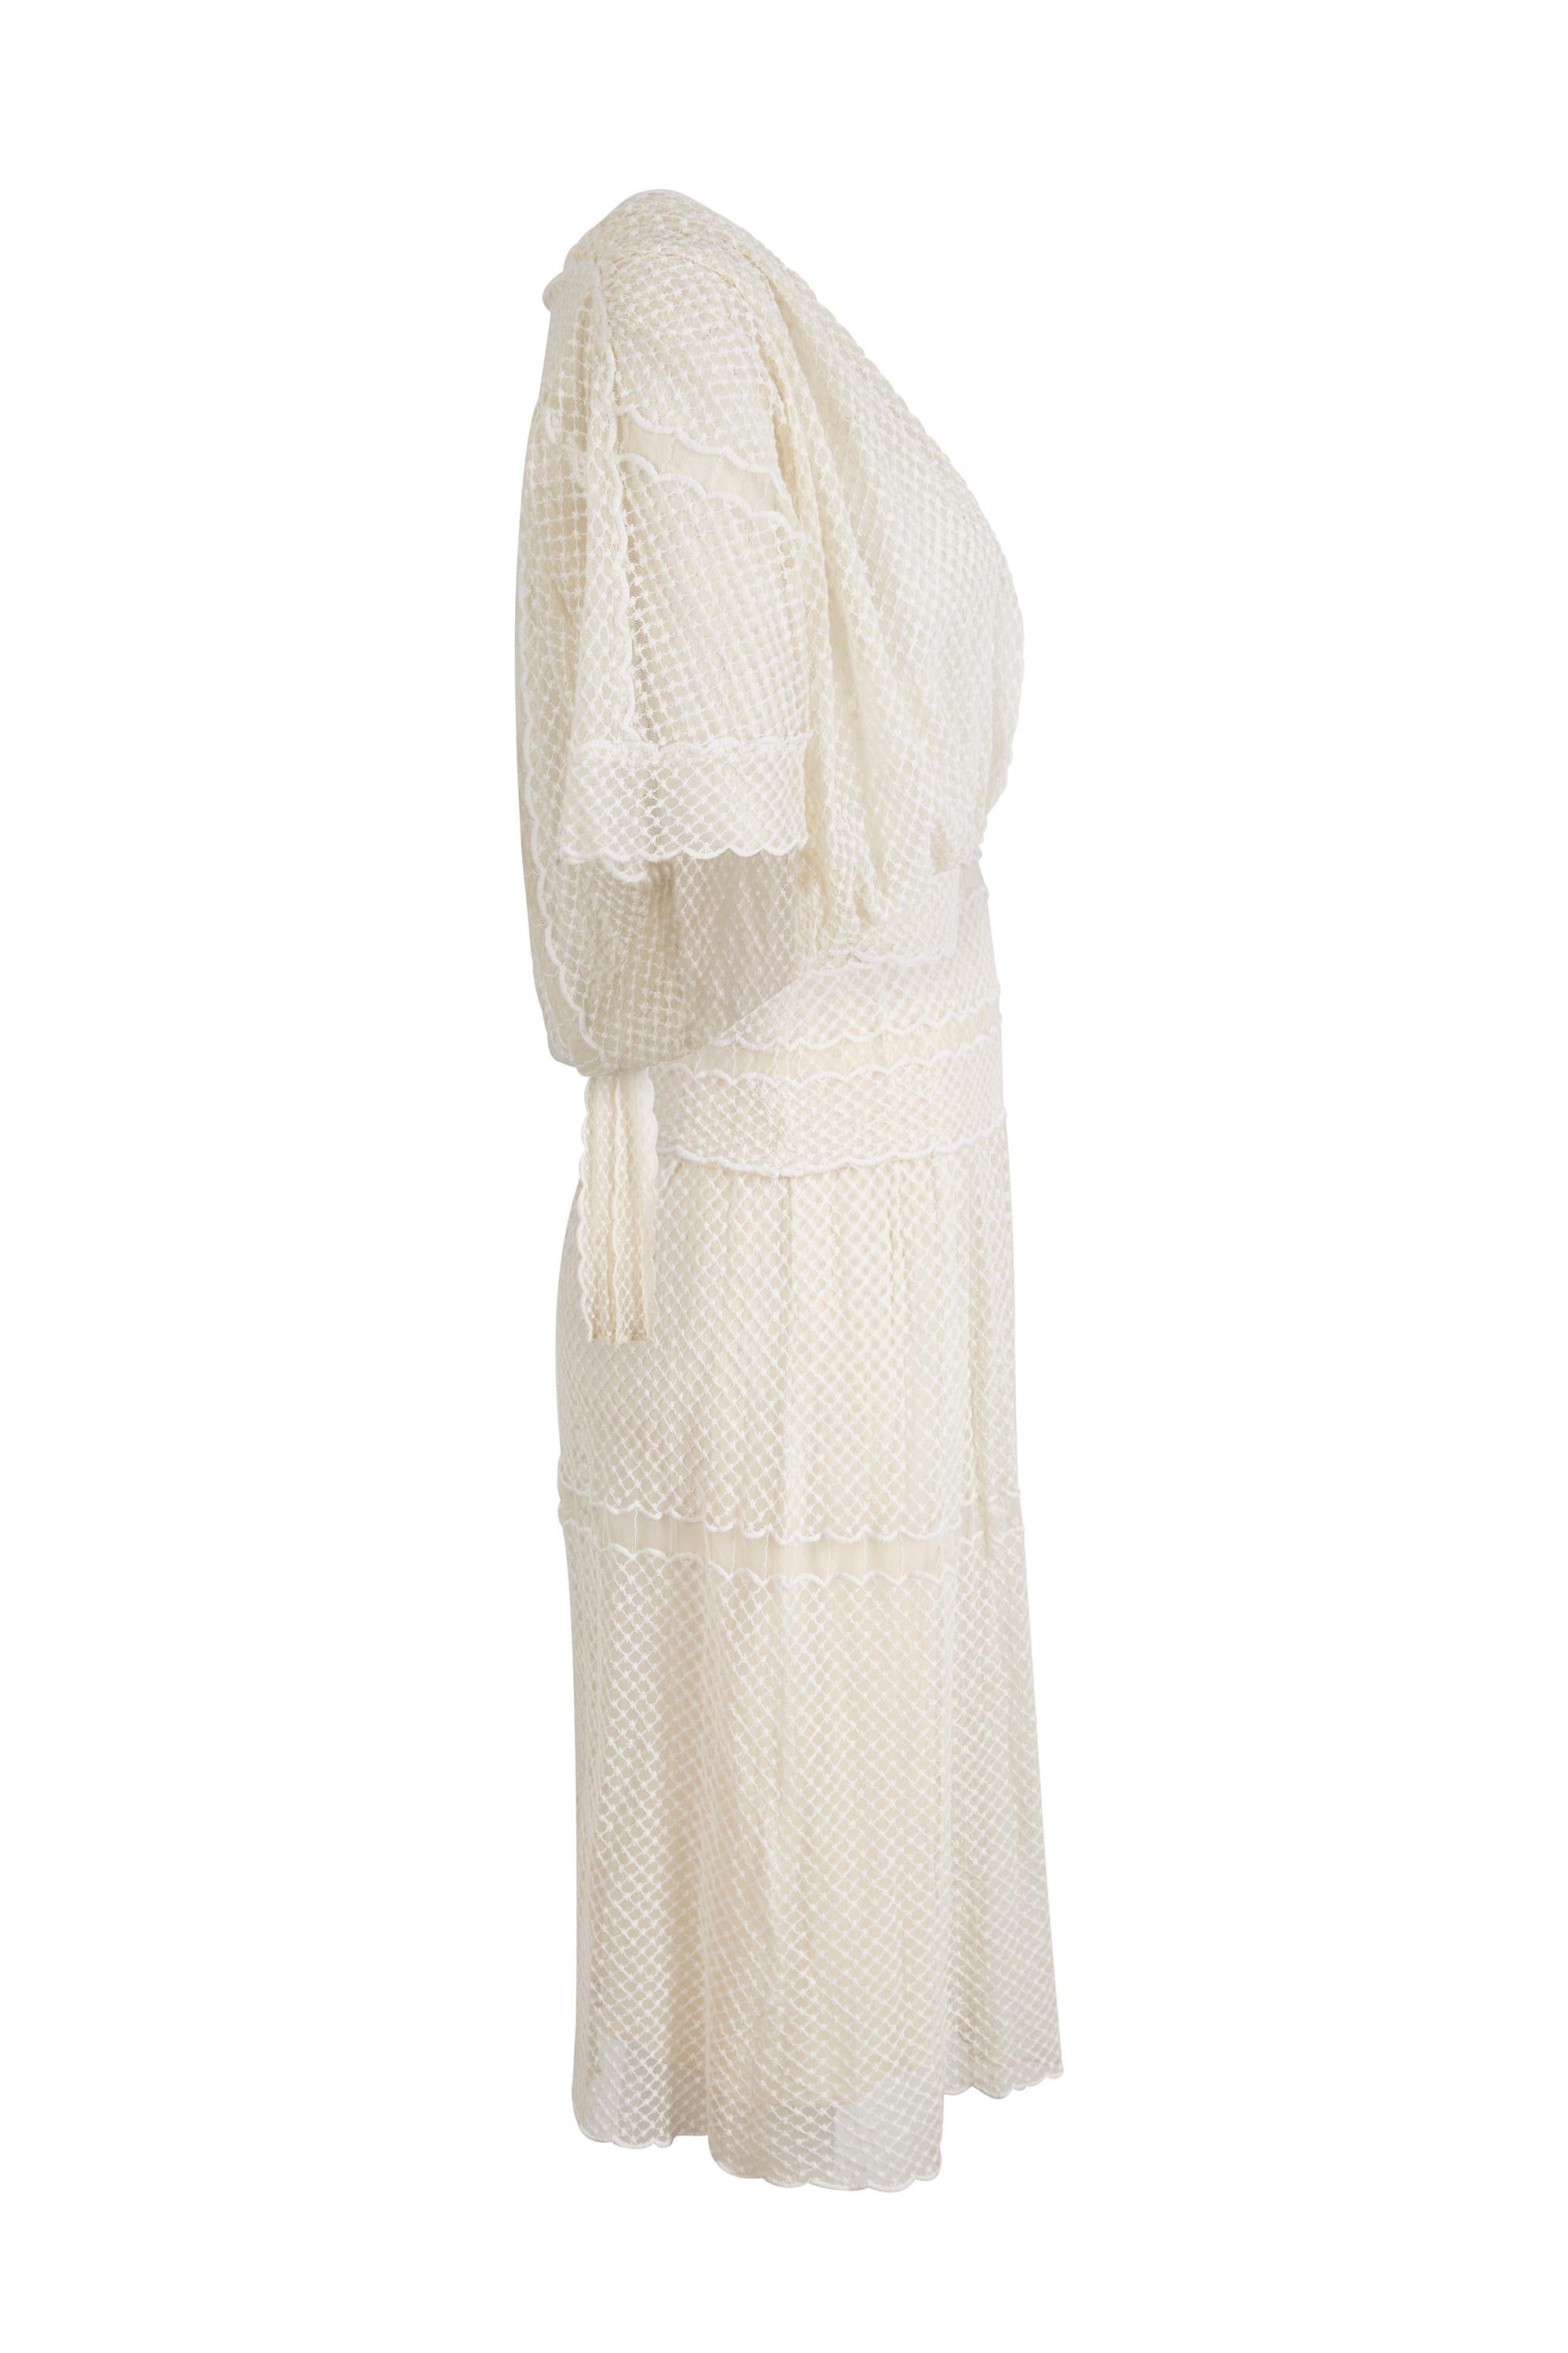 This charming 1970s ivory lace dress with matching bolero is by popular British designer Frank Usher and is in wonderful vintage condition with some exquisite design features. The dress has a beautiful simplicity of line and emulates a 1950s style